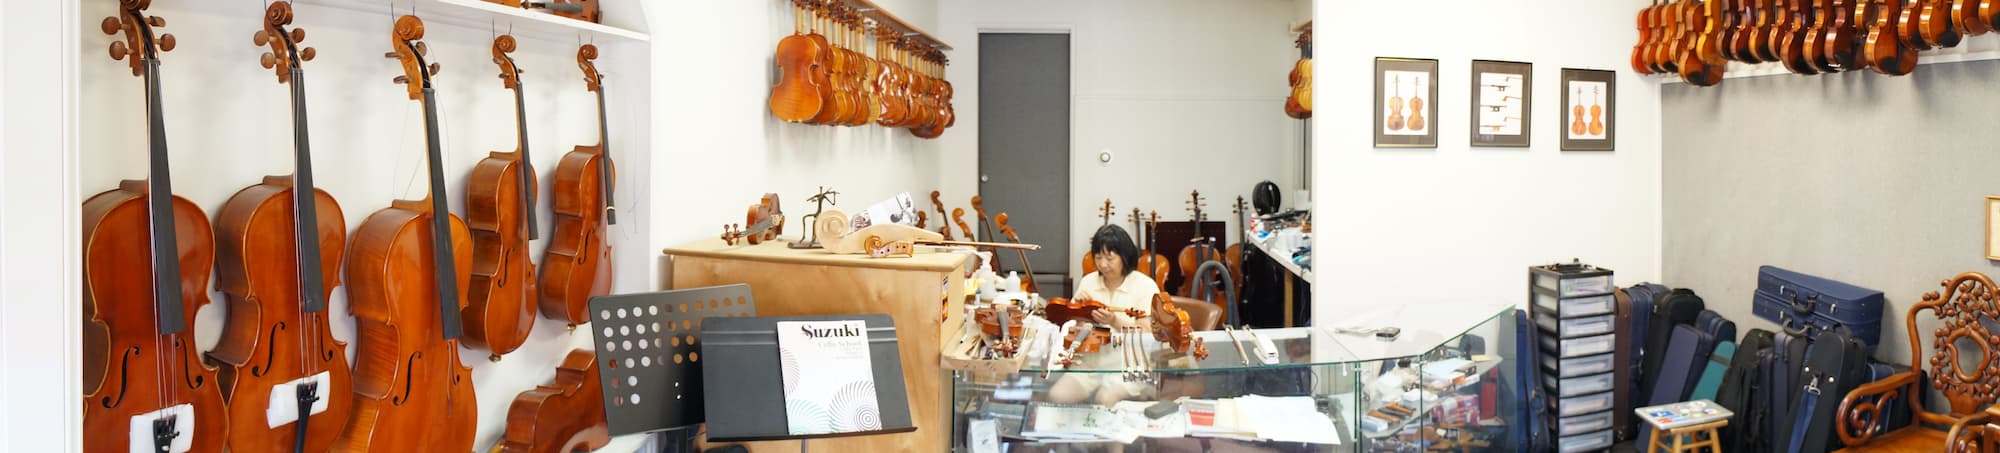 Mrs. Kot working in the violin shop